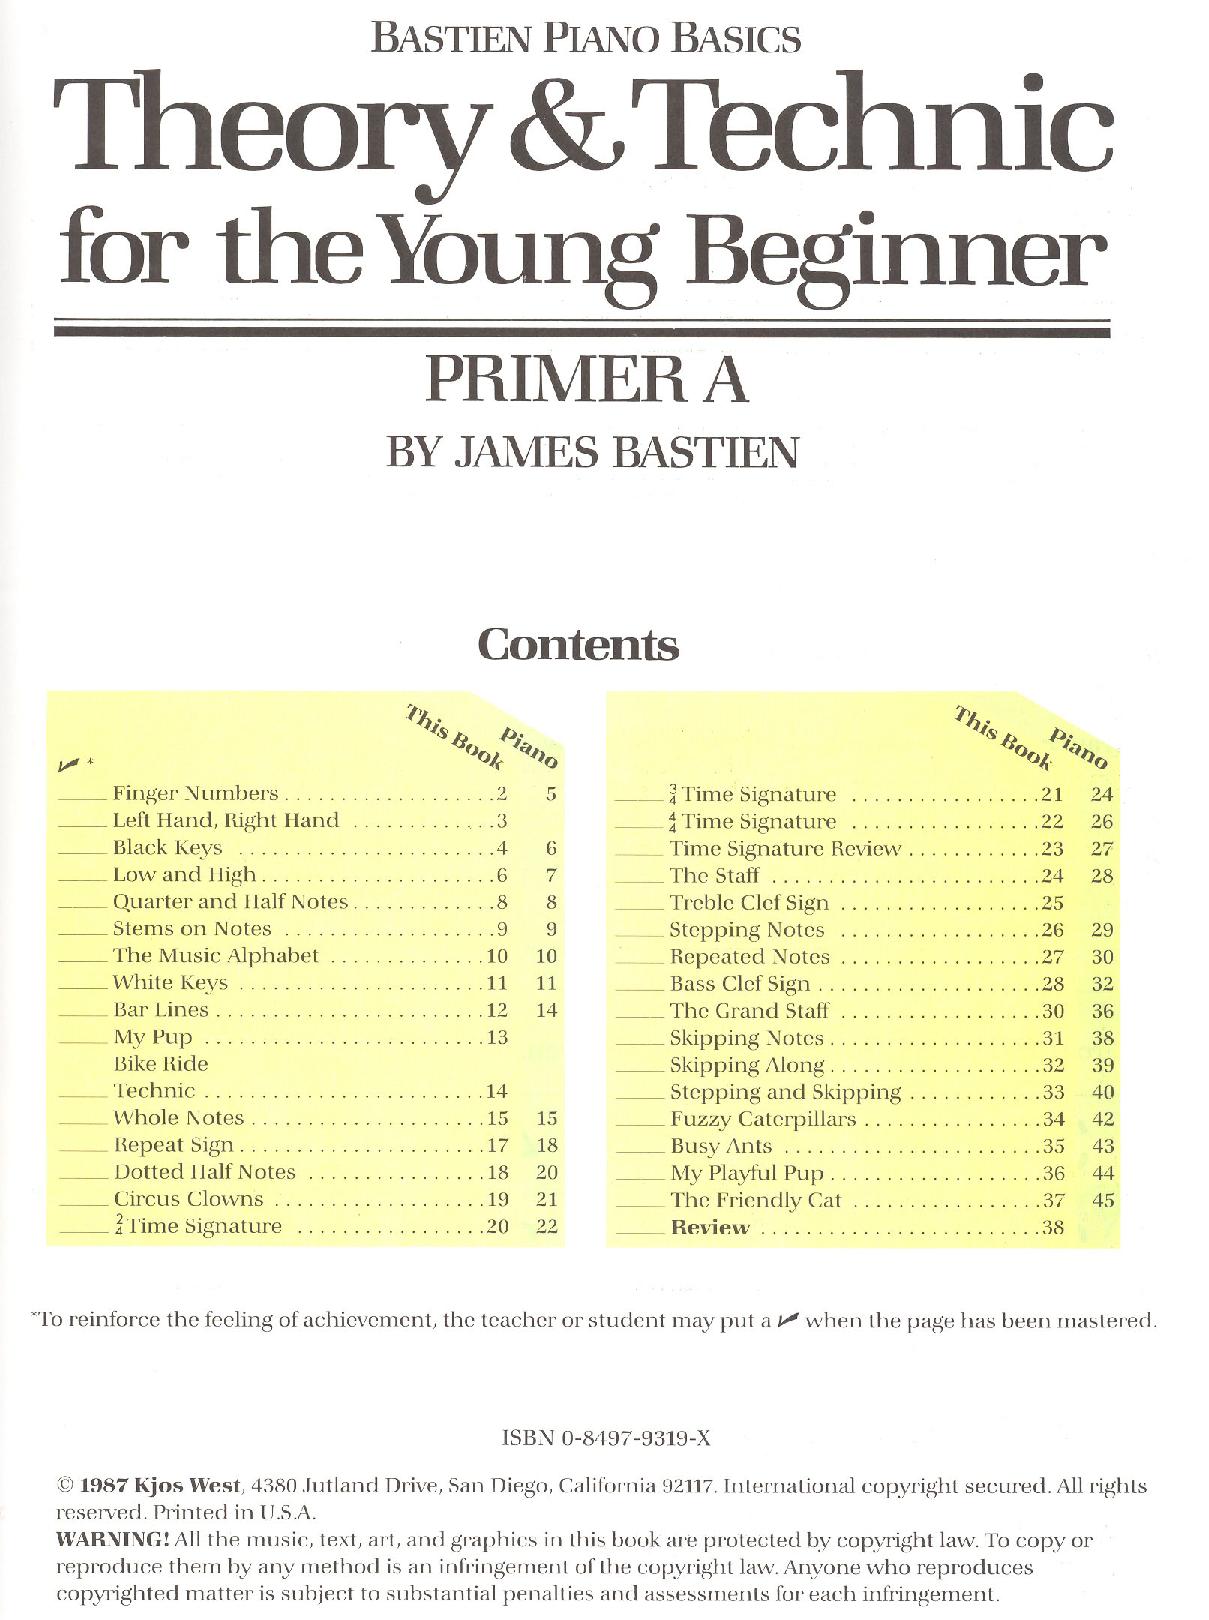 Bastien Theory & Technic for the Young Beginner, Primer A